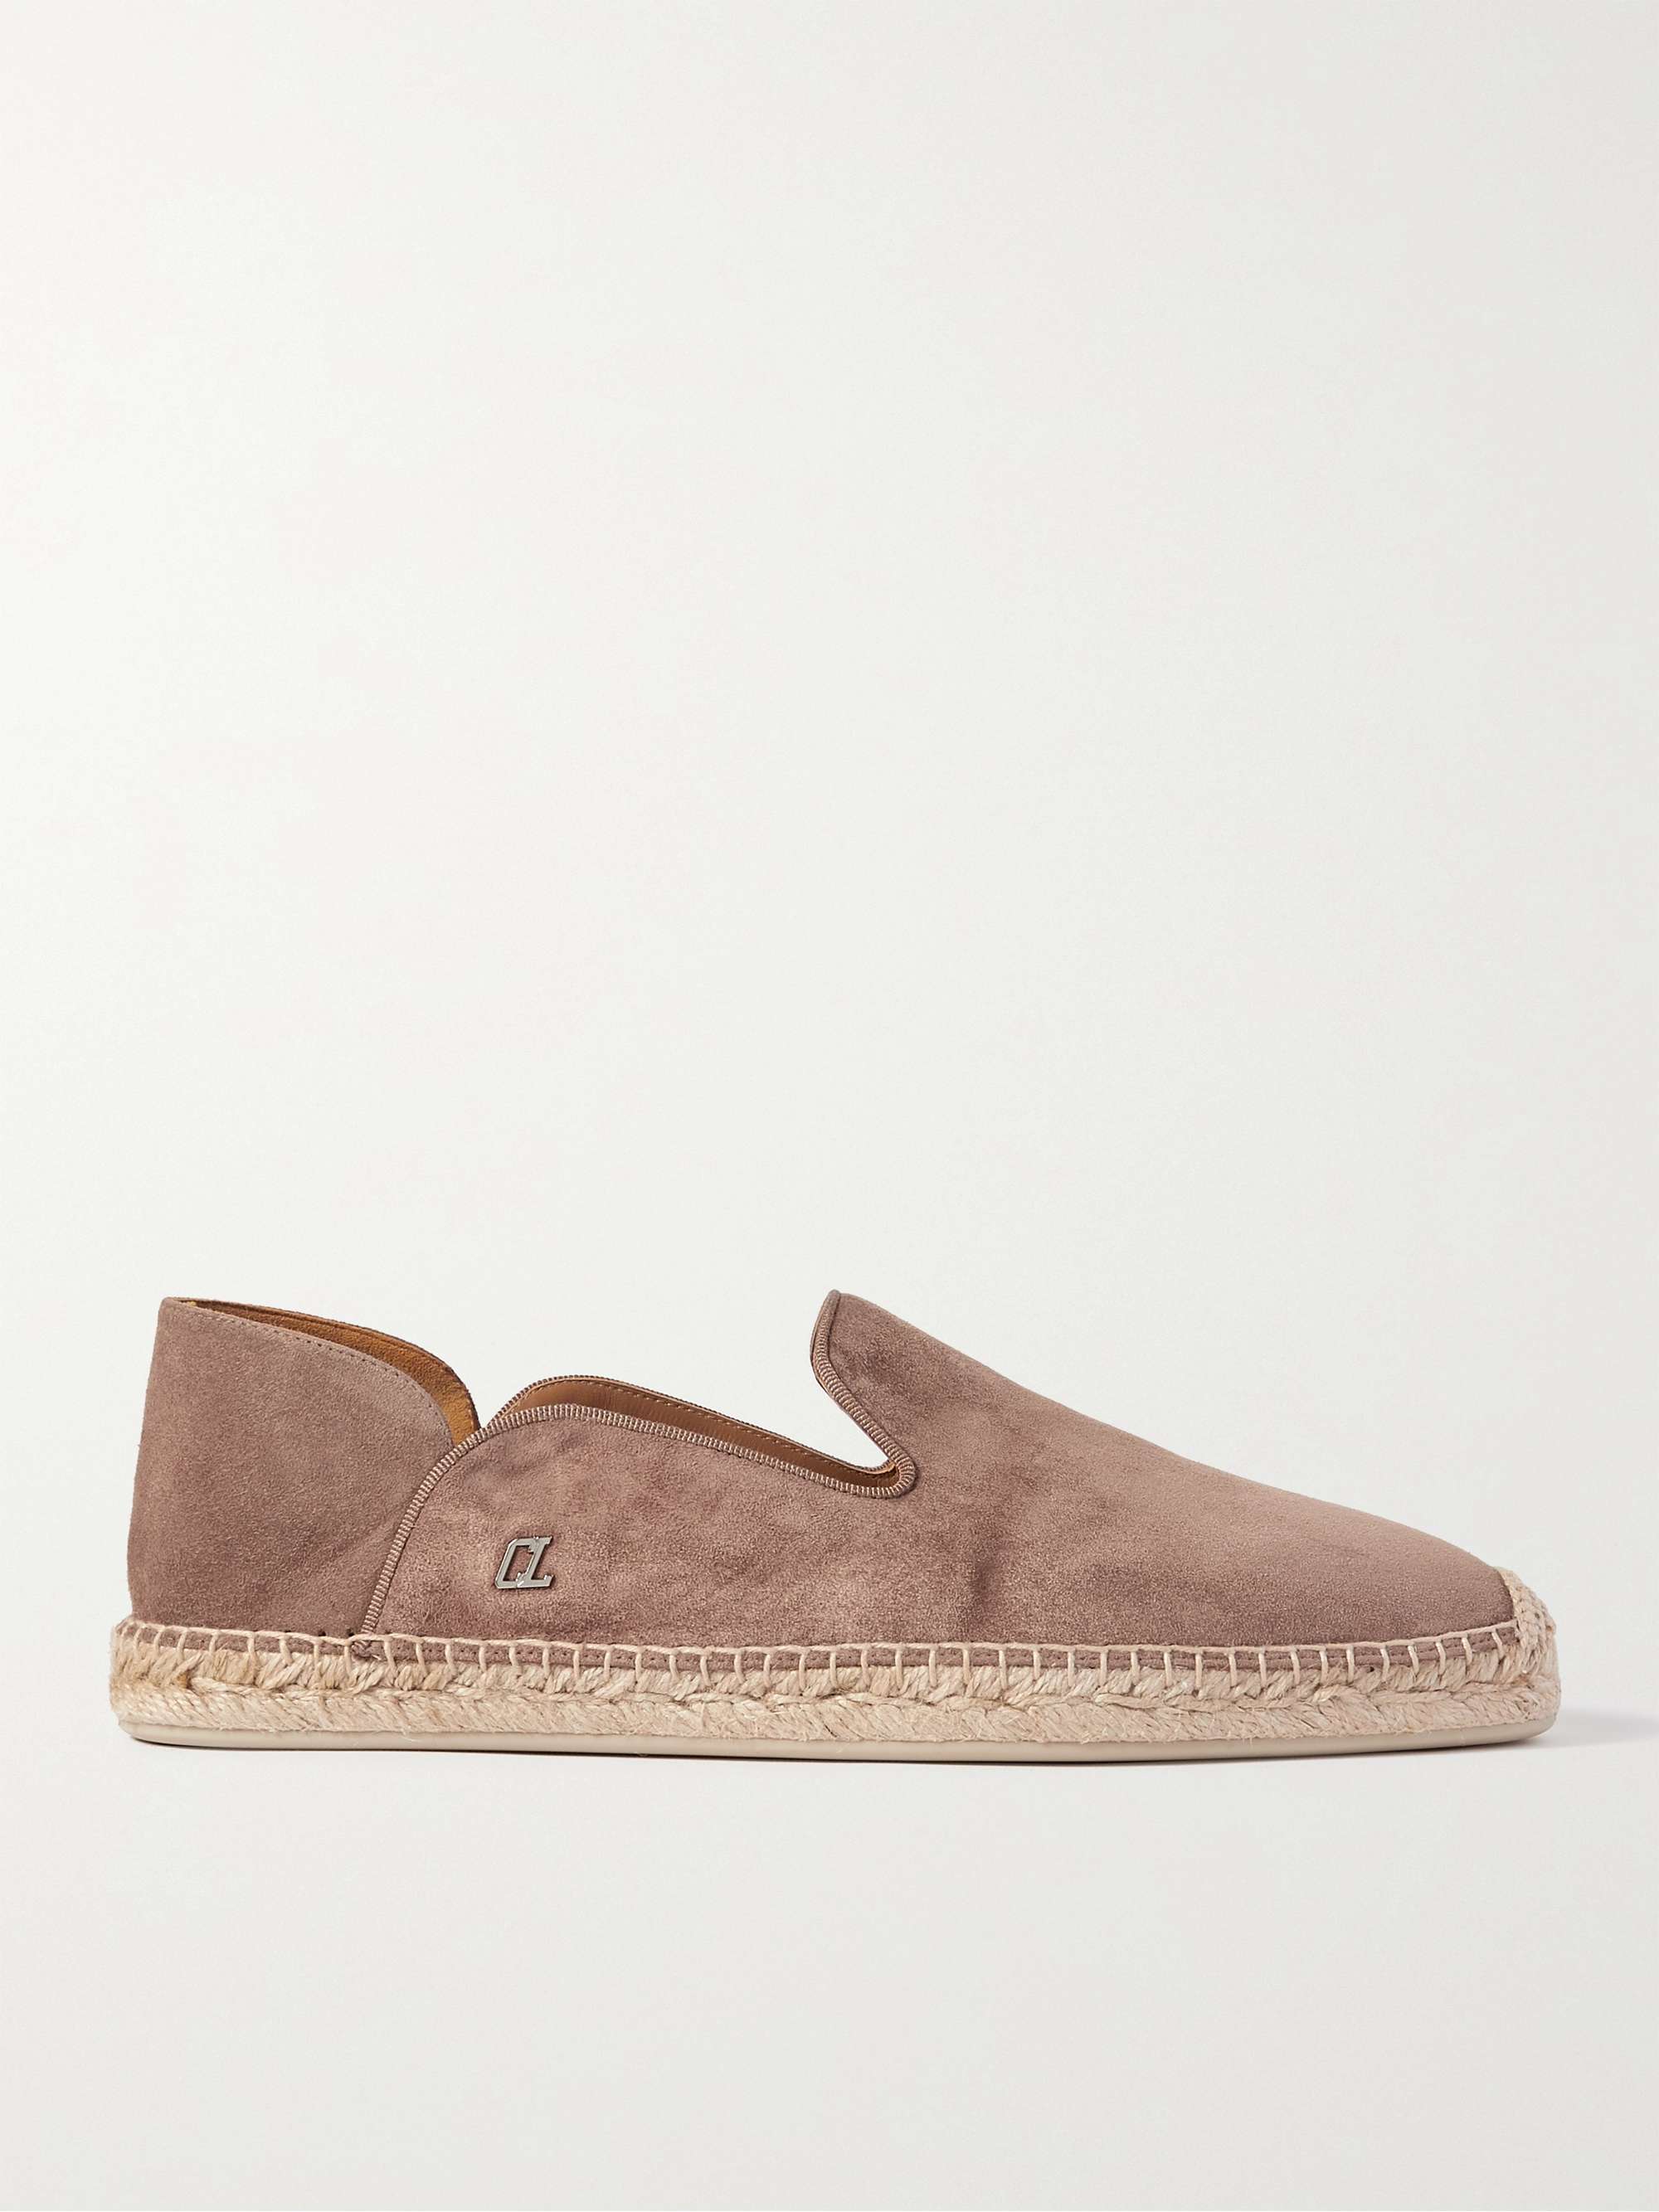 CHRISTIAN LOUBOUTIN Collapsible-Heel Suede Espadrilles